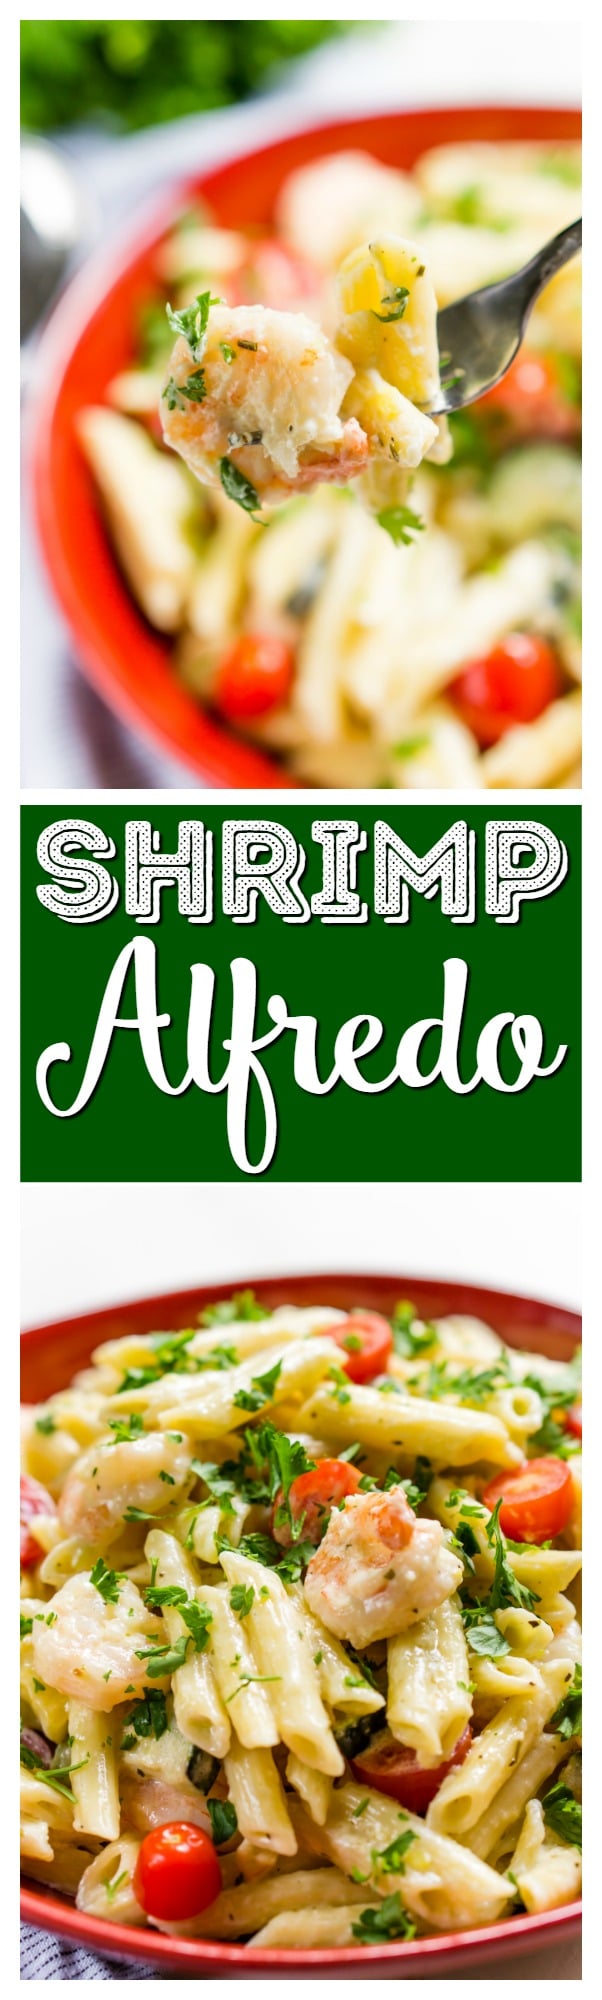 This Shrimp Alfredo is loaded with delicious shrimp, fresh veggies, and a creamy alfredo sauce that will have the whole family running to the table! Serve it up with the pasta of your choice! via @sugarandsoulco